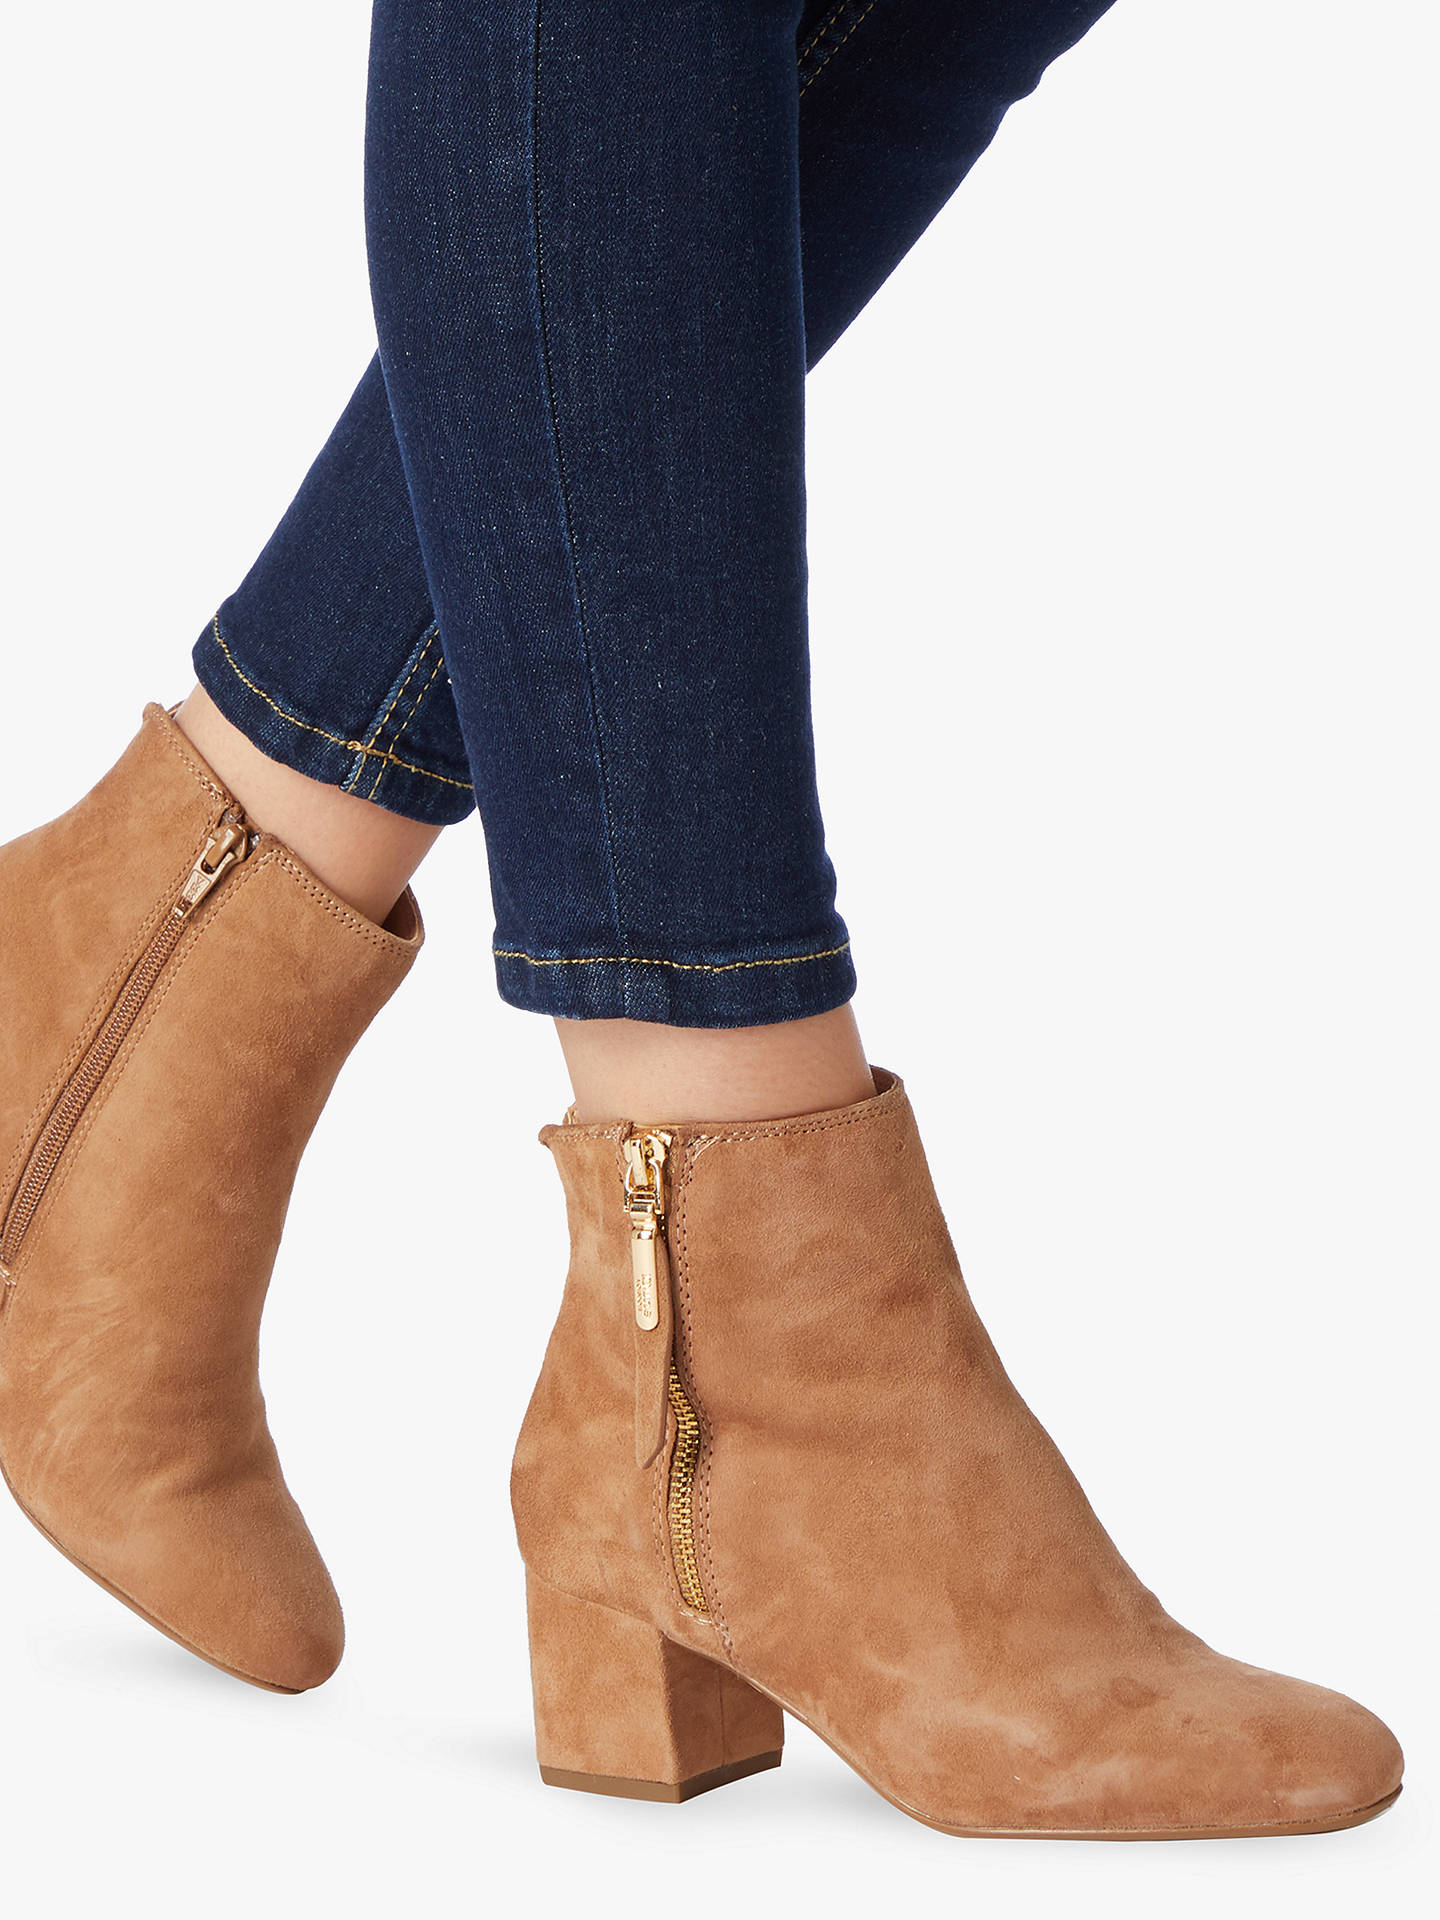 Dune Orlla Suede Side Zip Ankle Boots, Camel at John Lewis & Partners